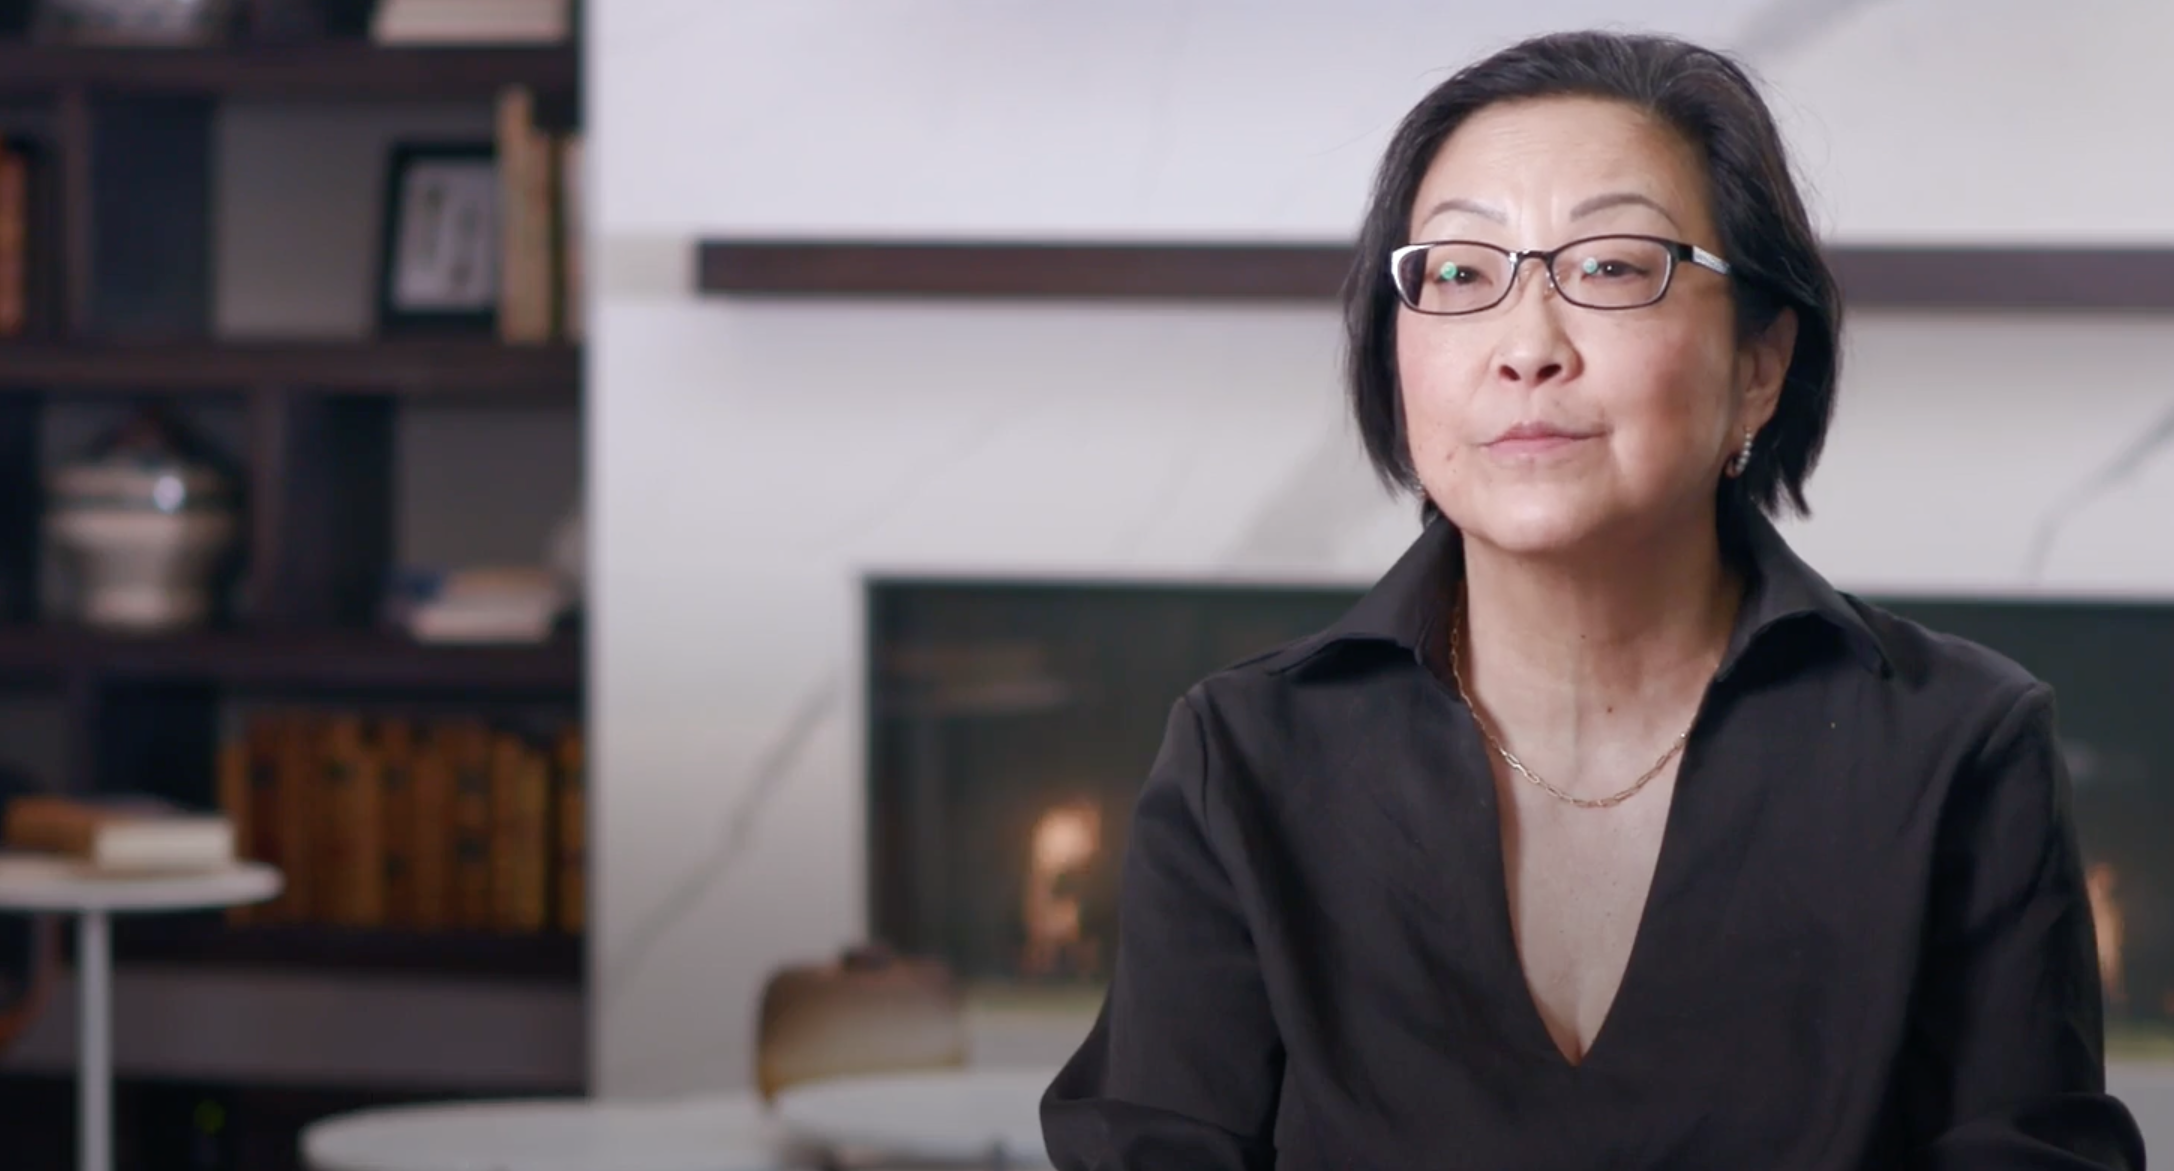 Whistleblower Aid CEO Libby Liu wears glasses and a black shirt with a simple gold chain. She is sitting in the forefront with a white marble fireplace and small, decorated book case in the background.